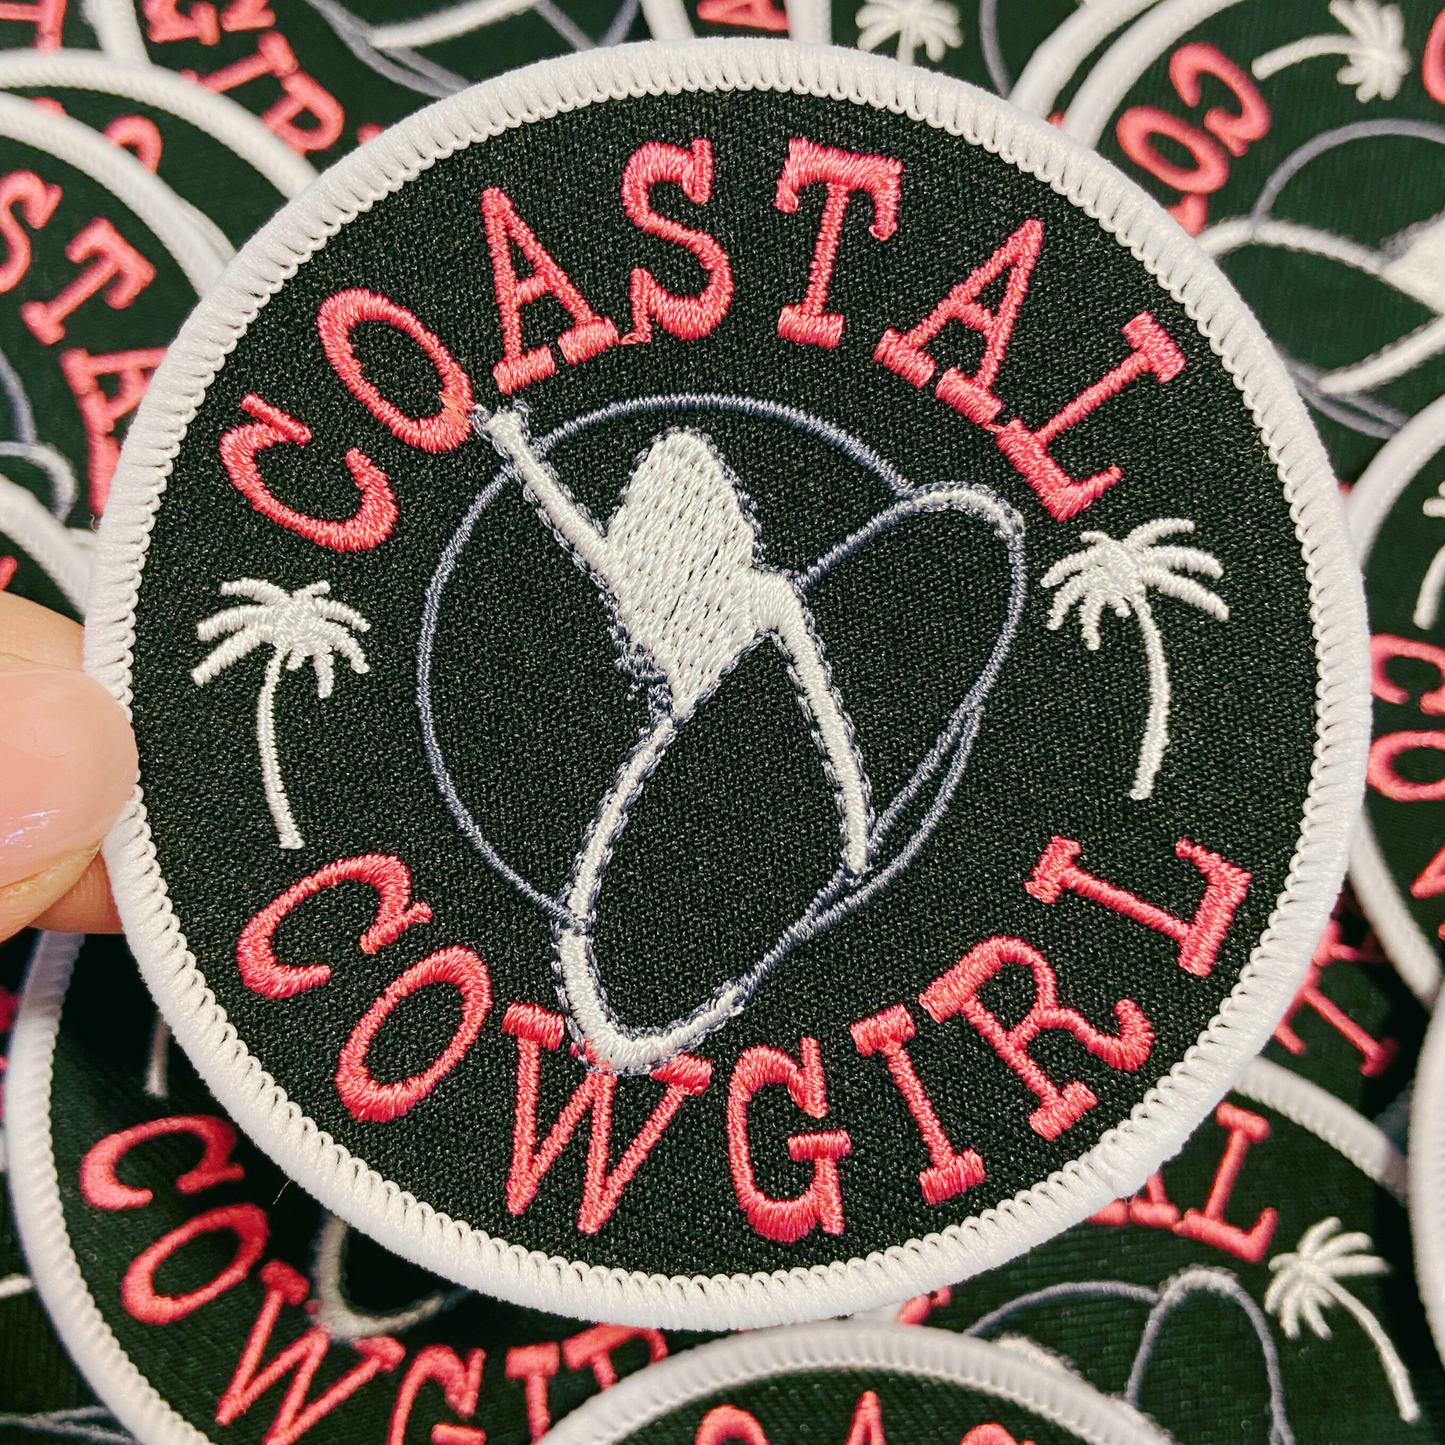 3" Coastal Cowgirl  - Embroidered Hat Patch